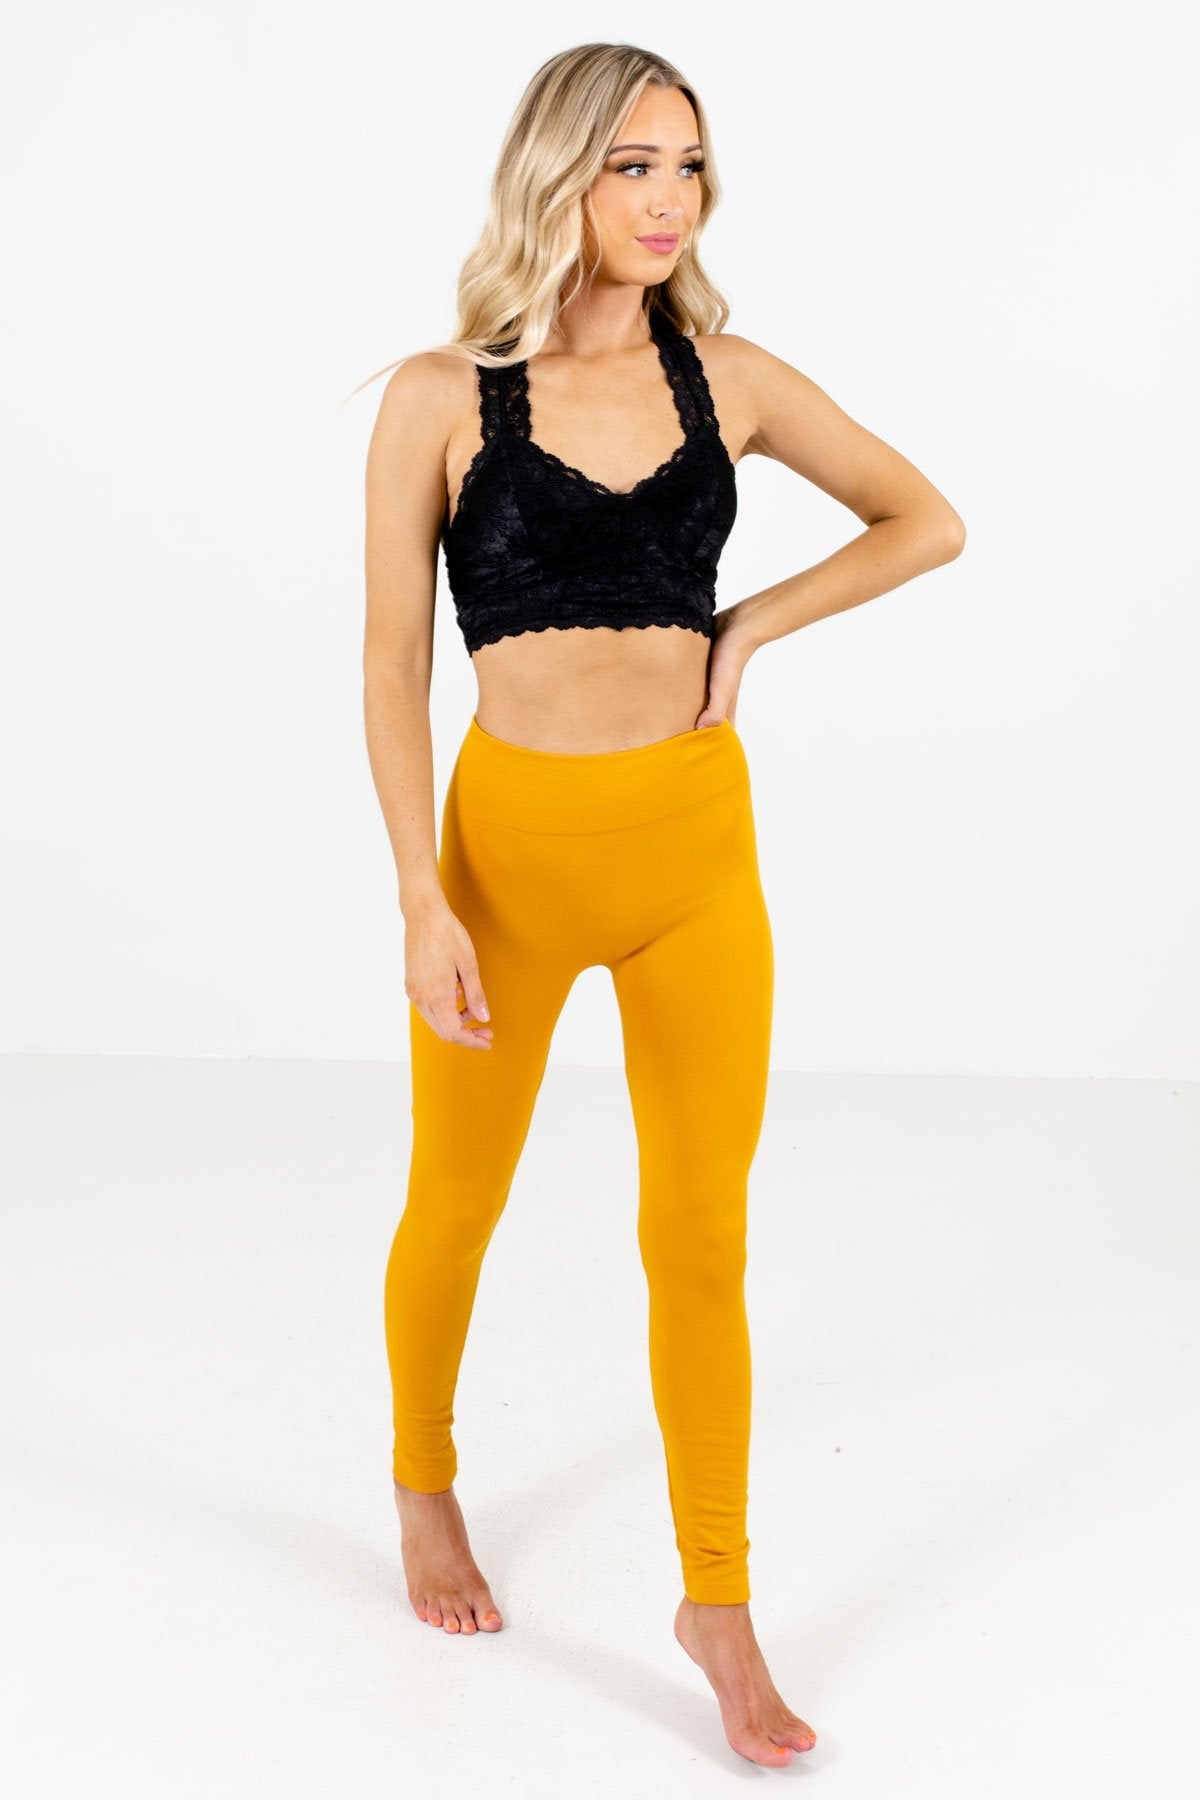 Women���s Mustard Yellow High-Quality Material Boutique Leggings